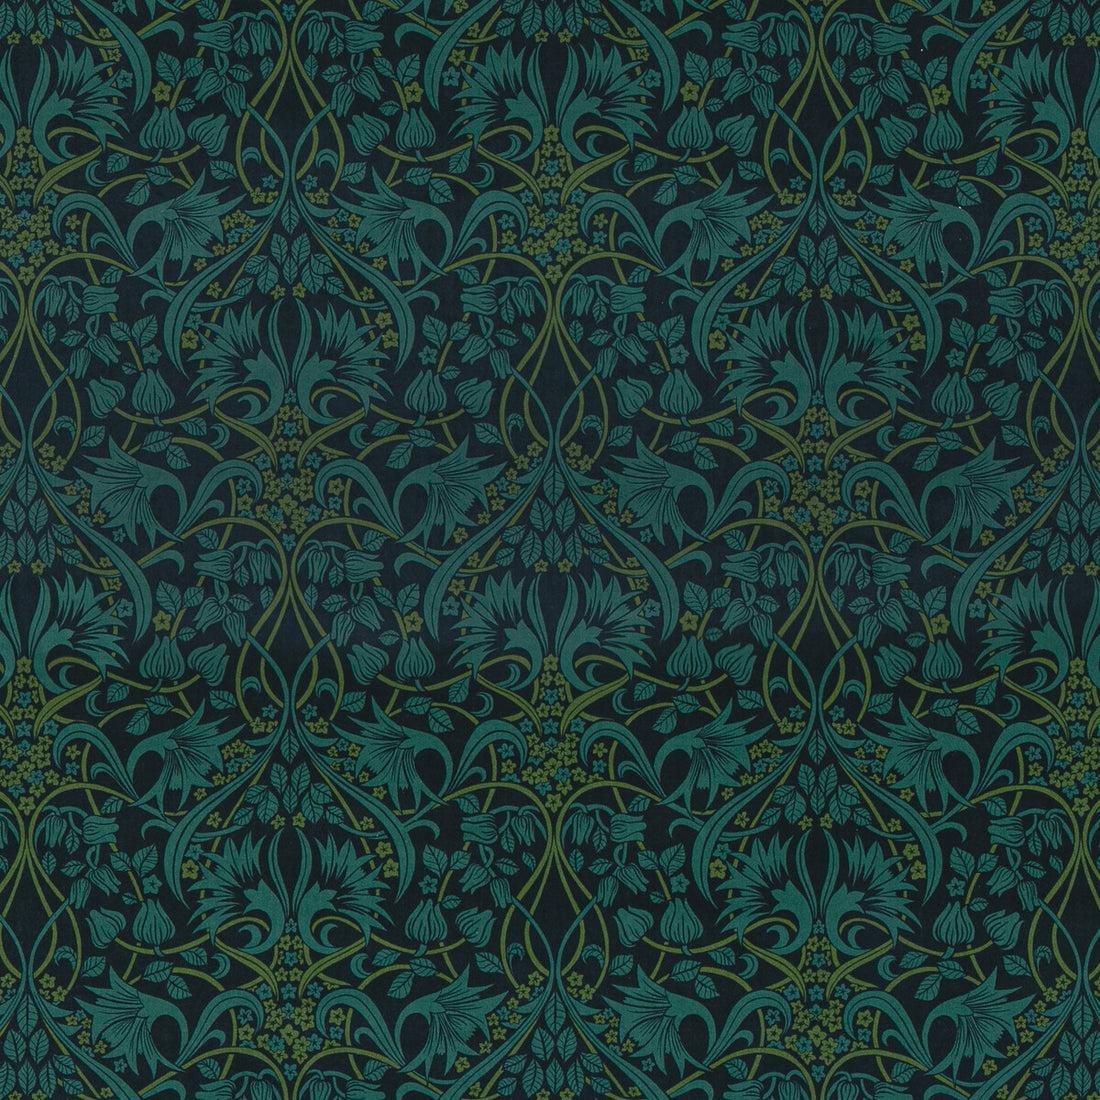 Fritillerie Velvet fabric in indigo/teal color - pattern BP10975.1.0 - by G P &amp; J Baker in the Original Brantwood Fabric collection